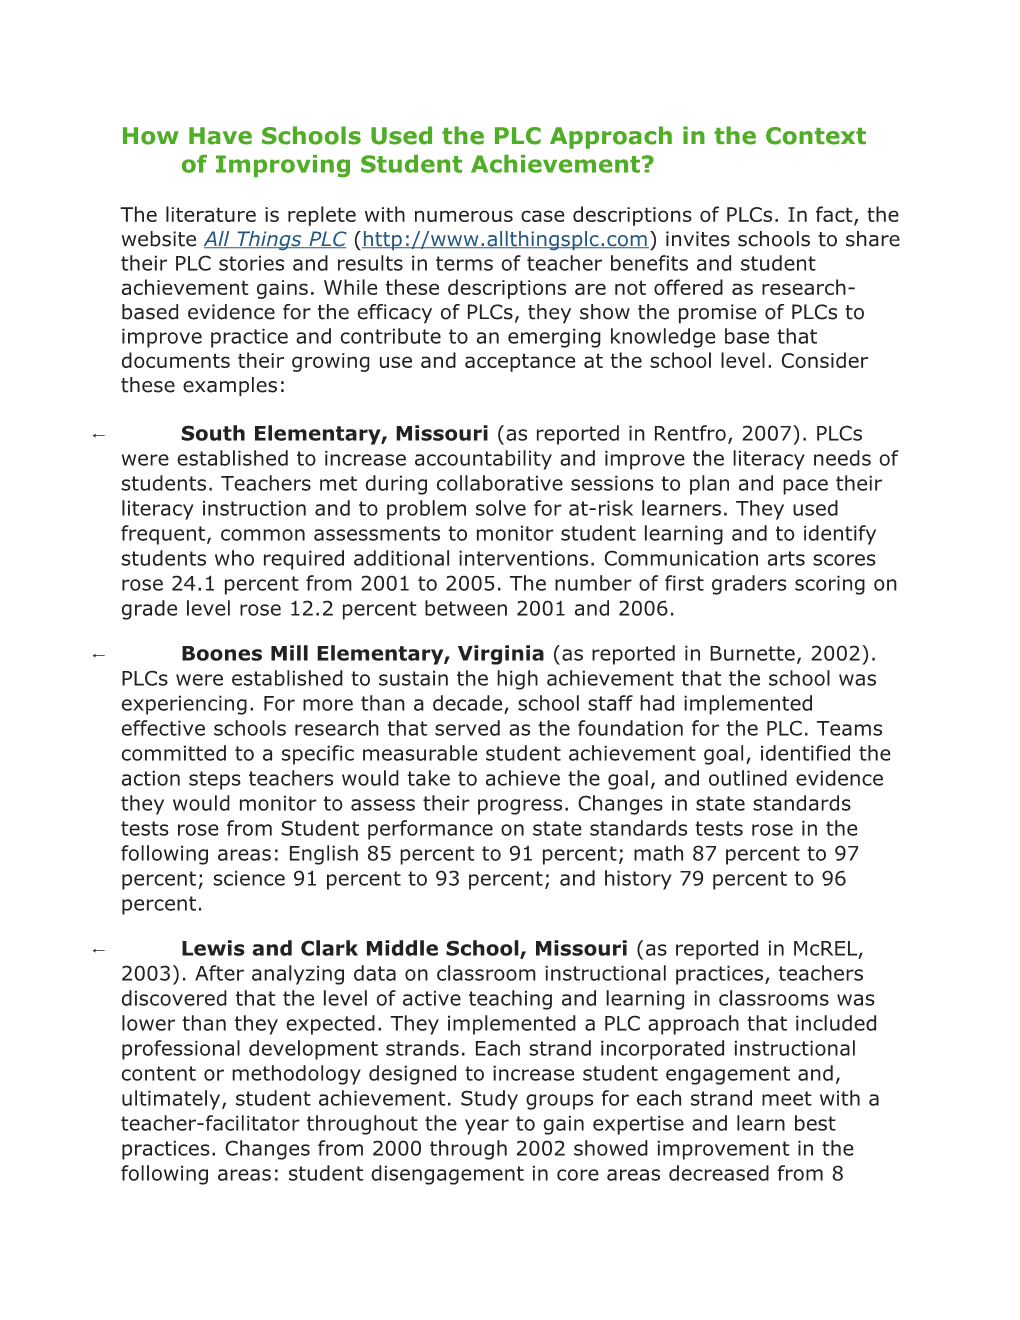 How Have Schools Used the PLC Approach in the Context of Improving Student Achievement